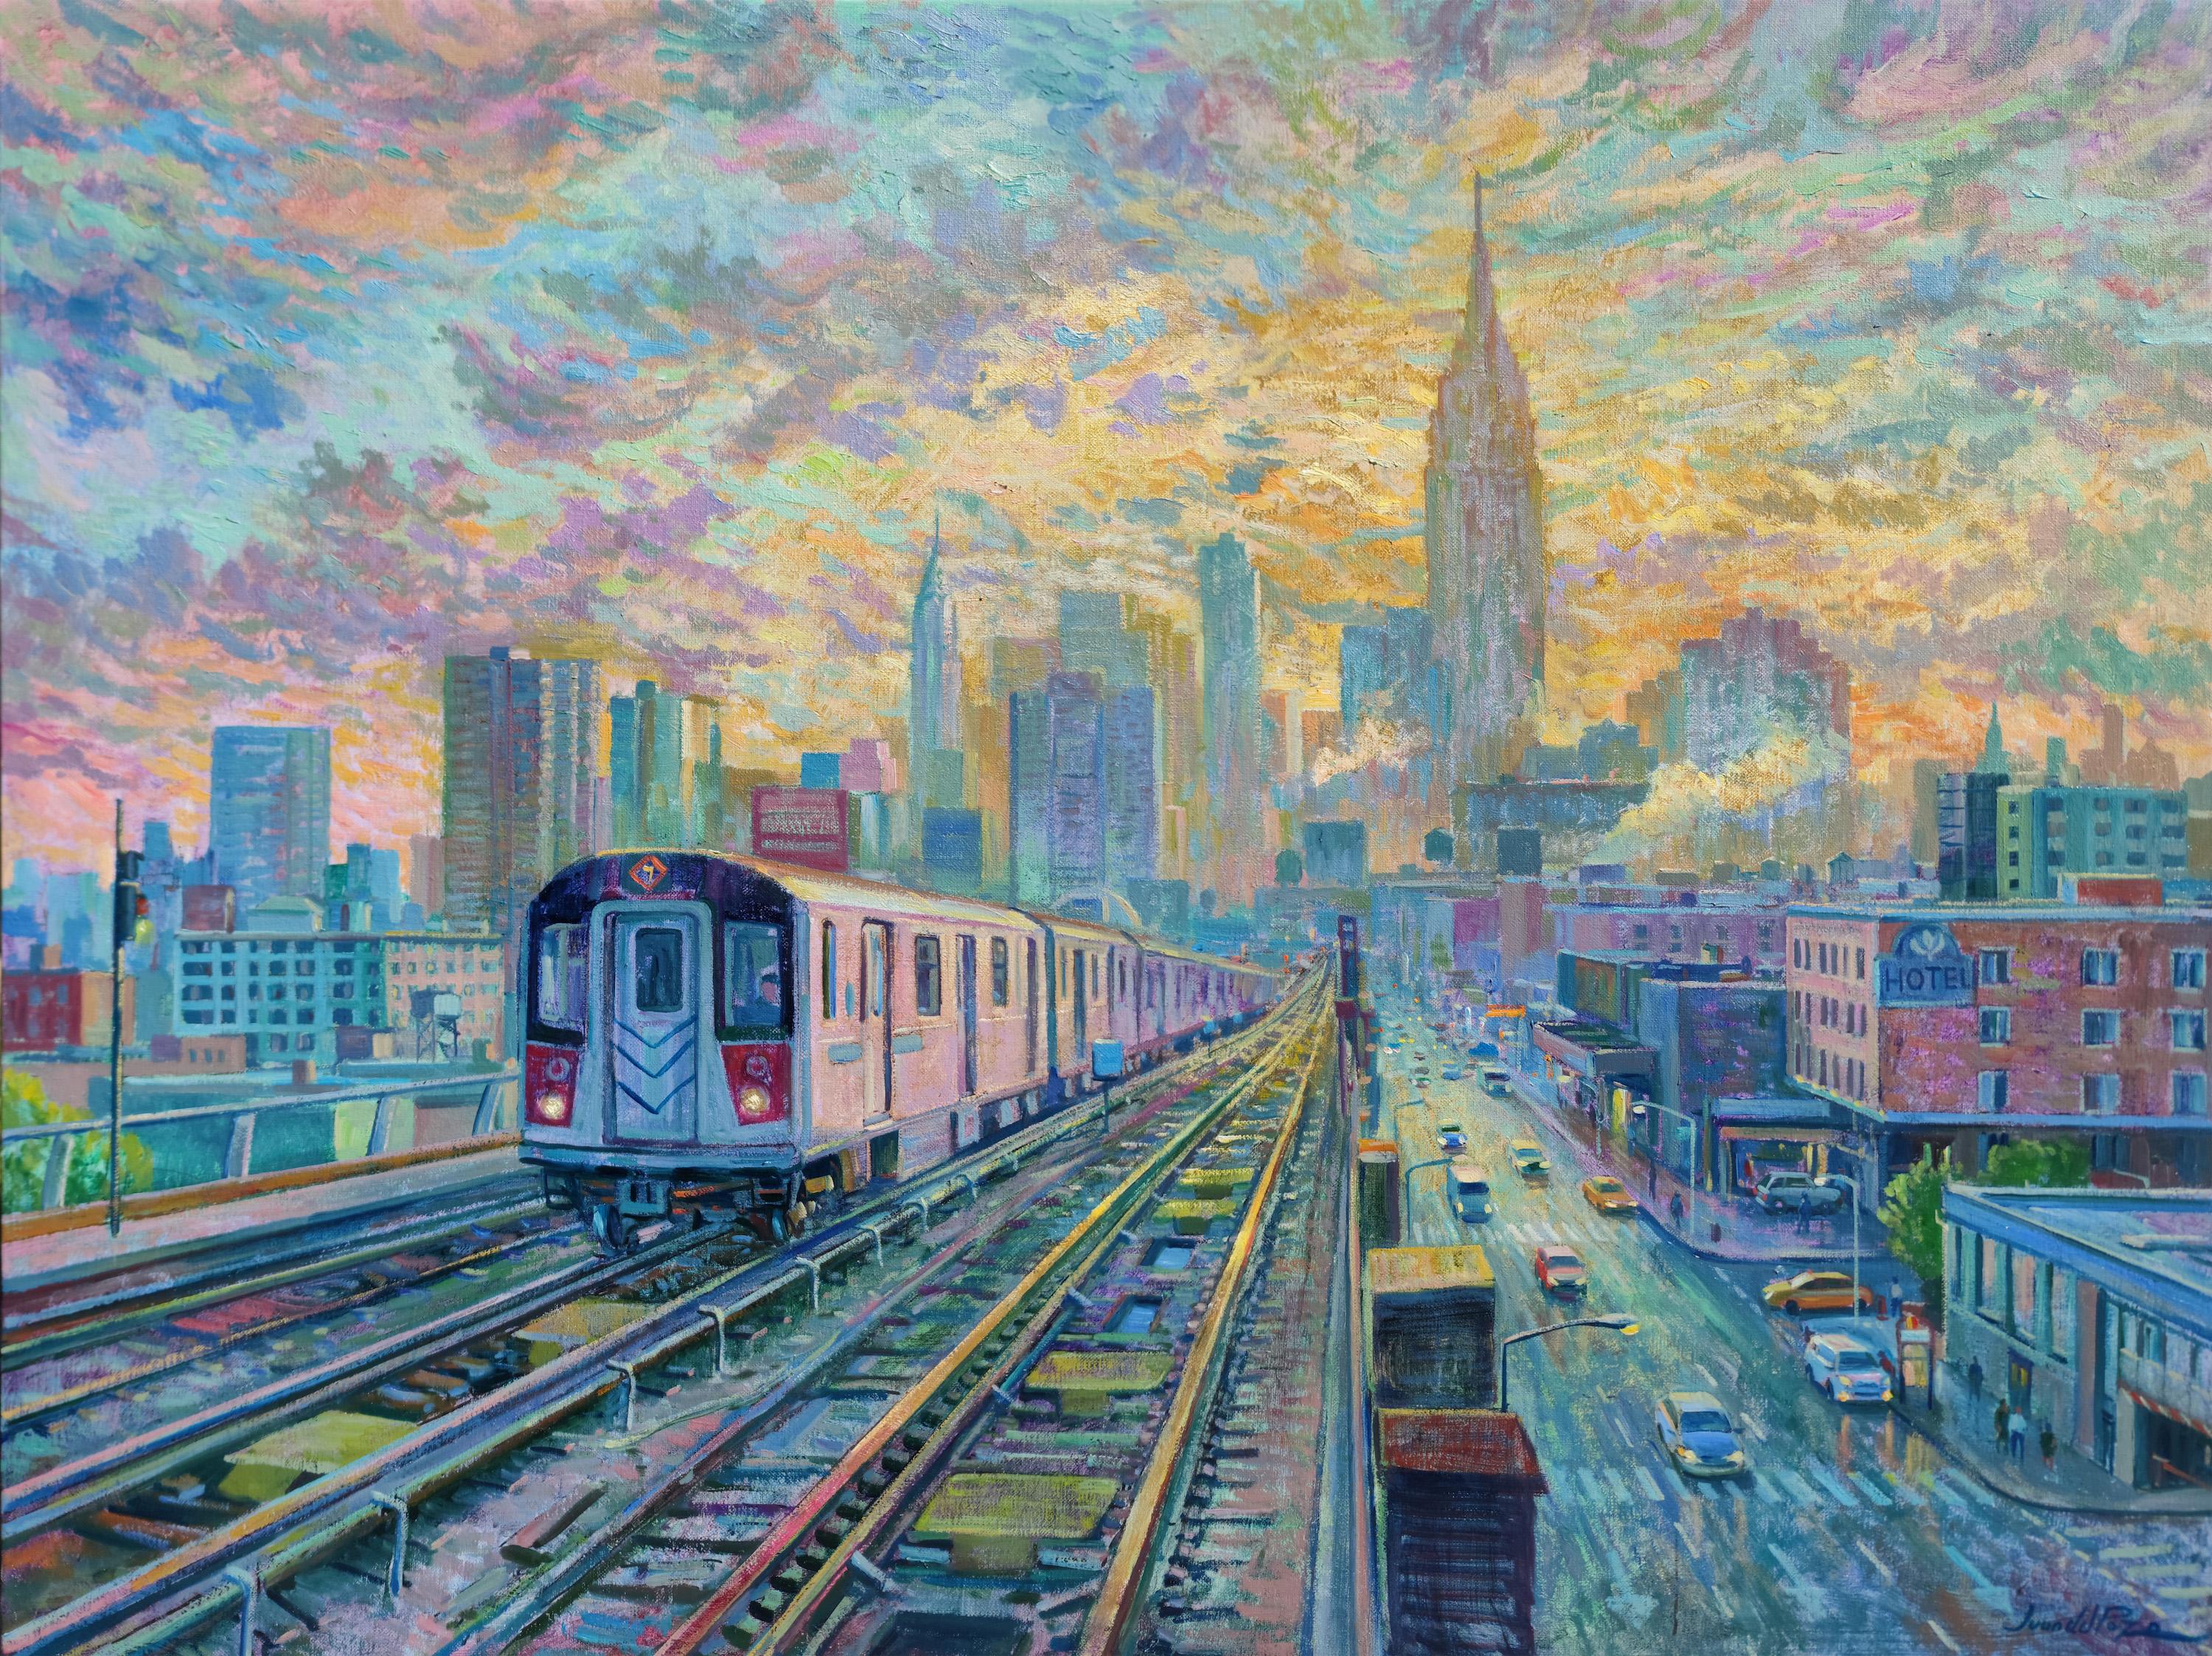 New York Railway -original cityscape impressionism oil painting-contemporary art - Painting by Juan del Pozo